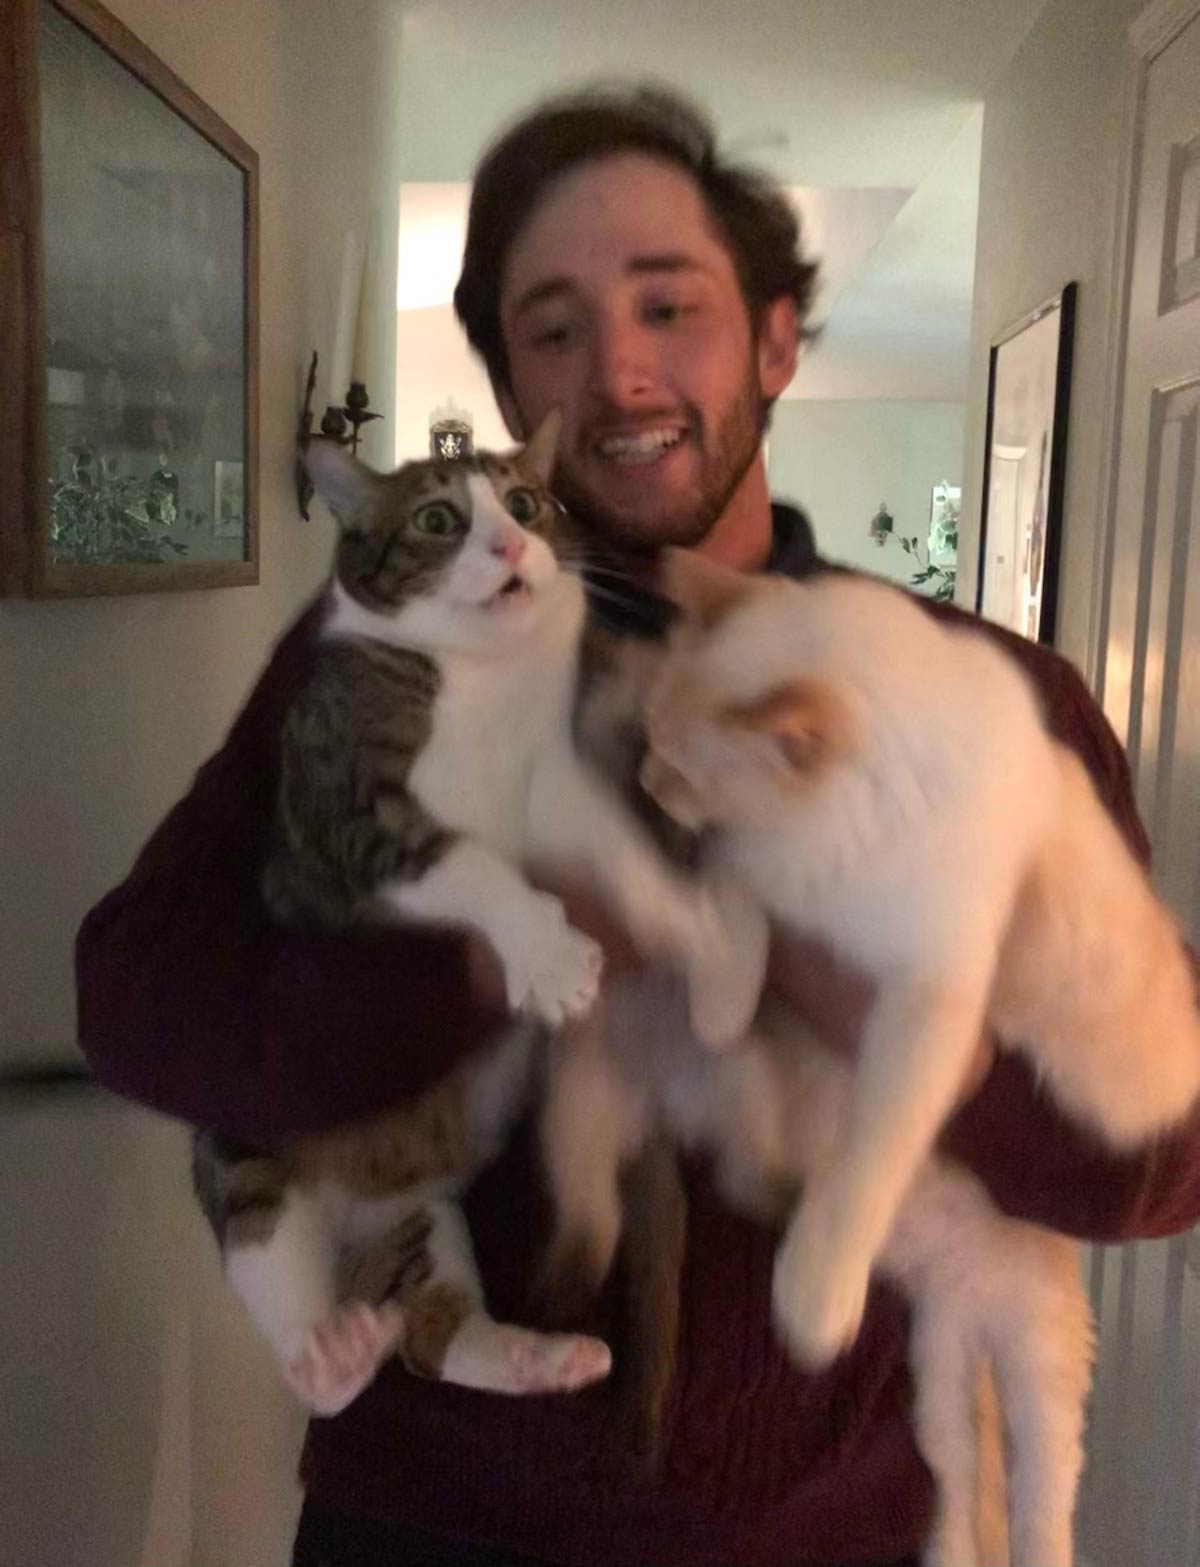 I attempted to take a pic with all 3 of my cats